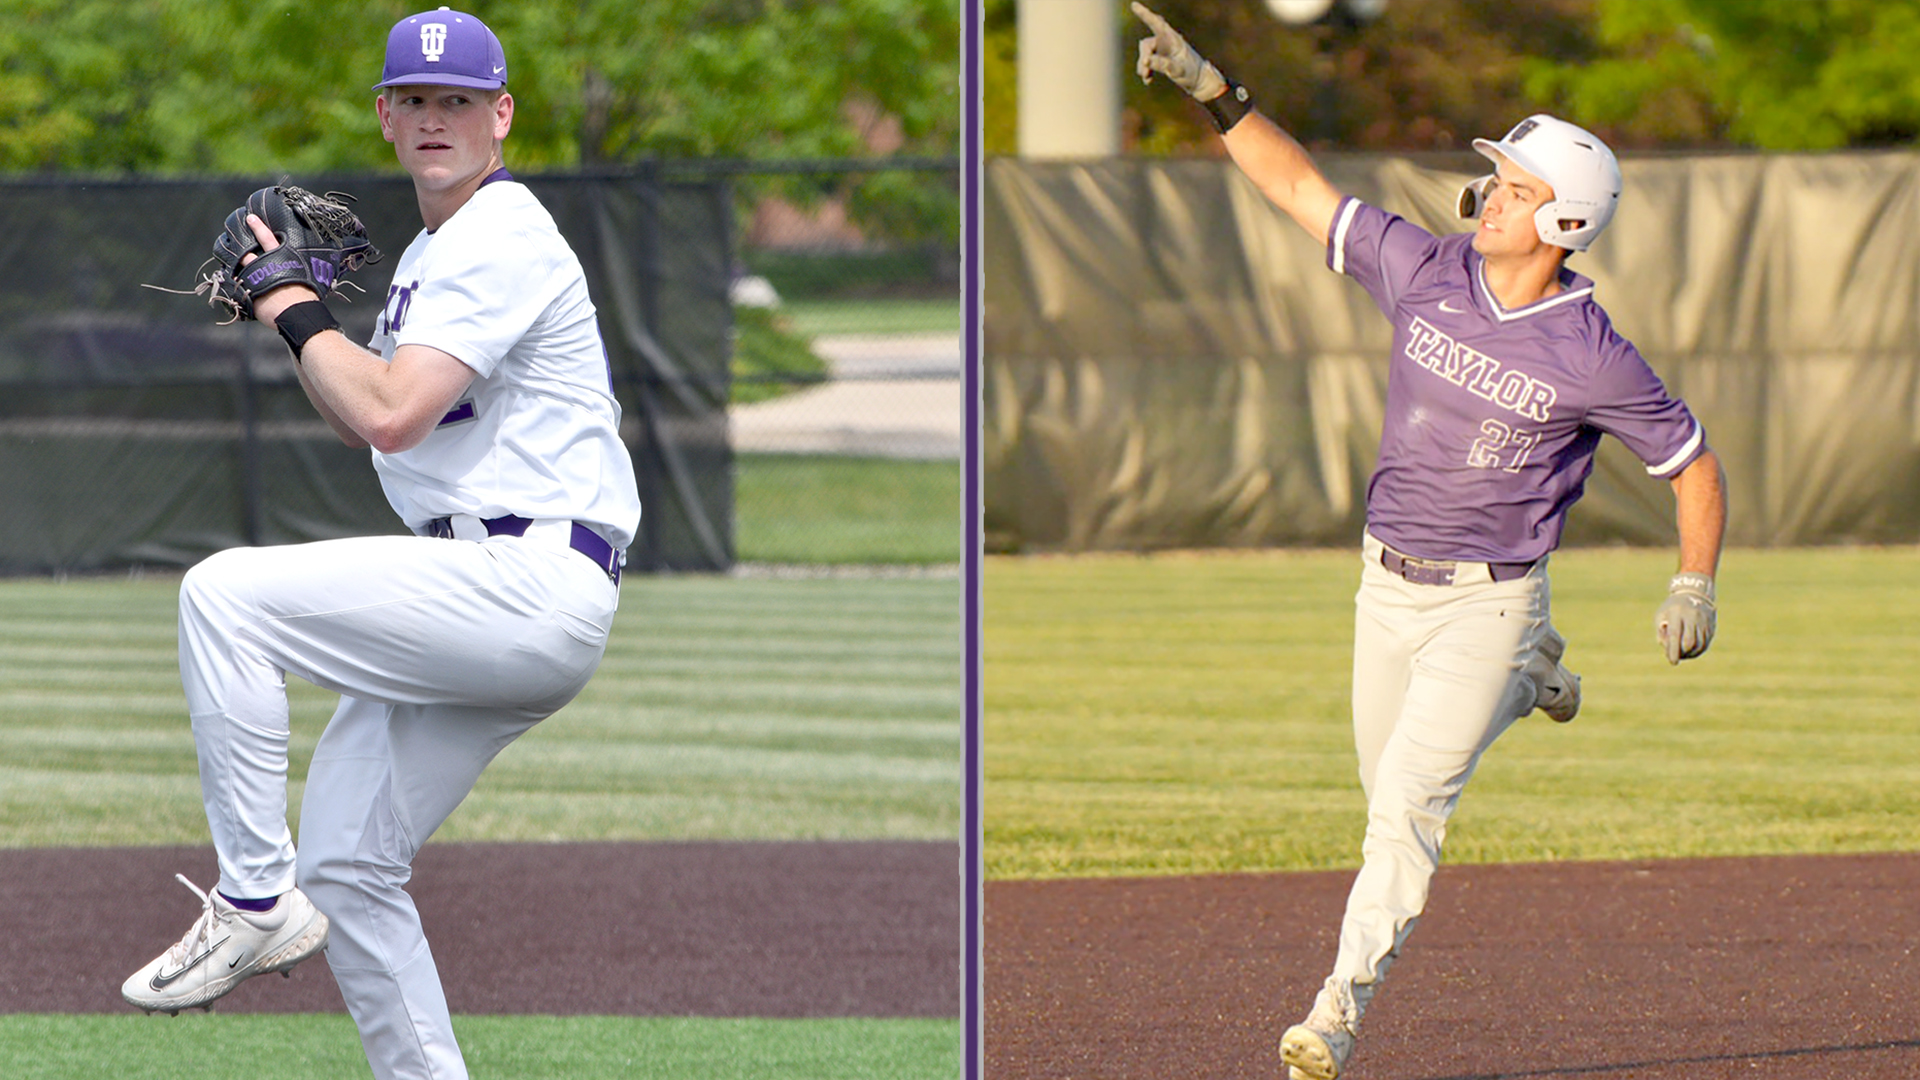 Pentecost, Picchiotti Sweep CL Baseball Weekly Honors